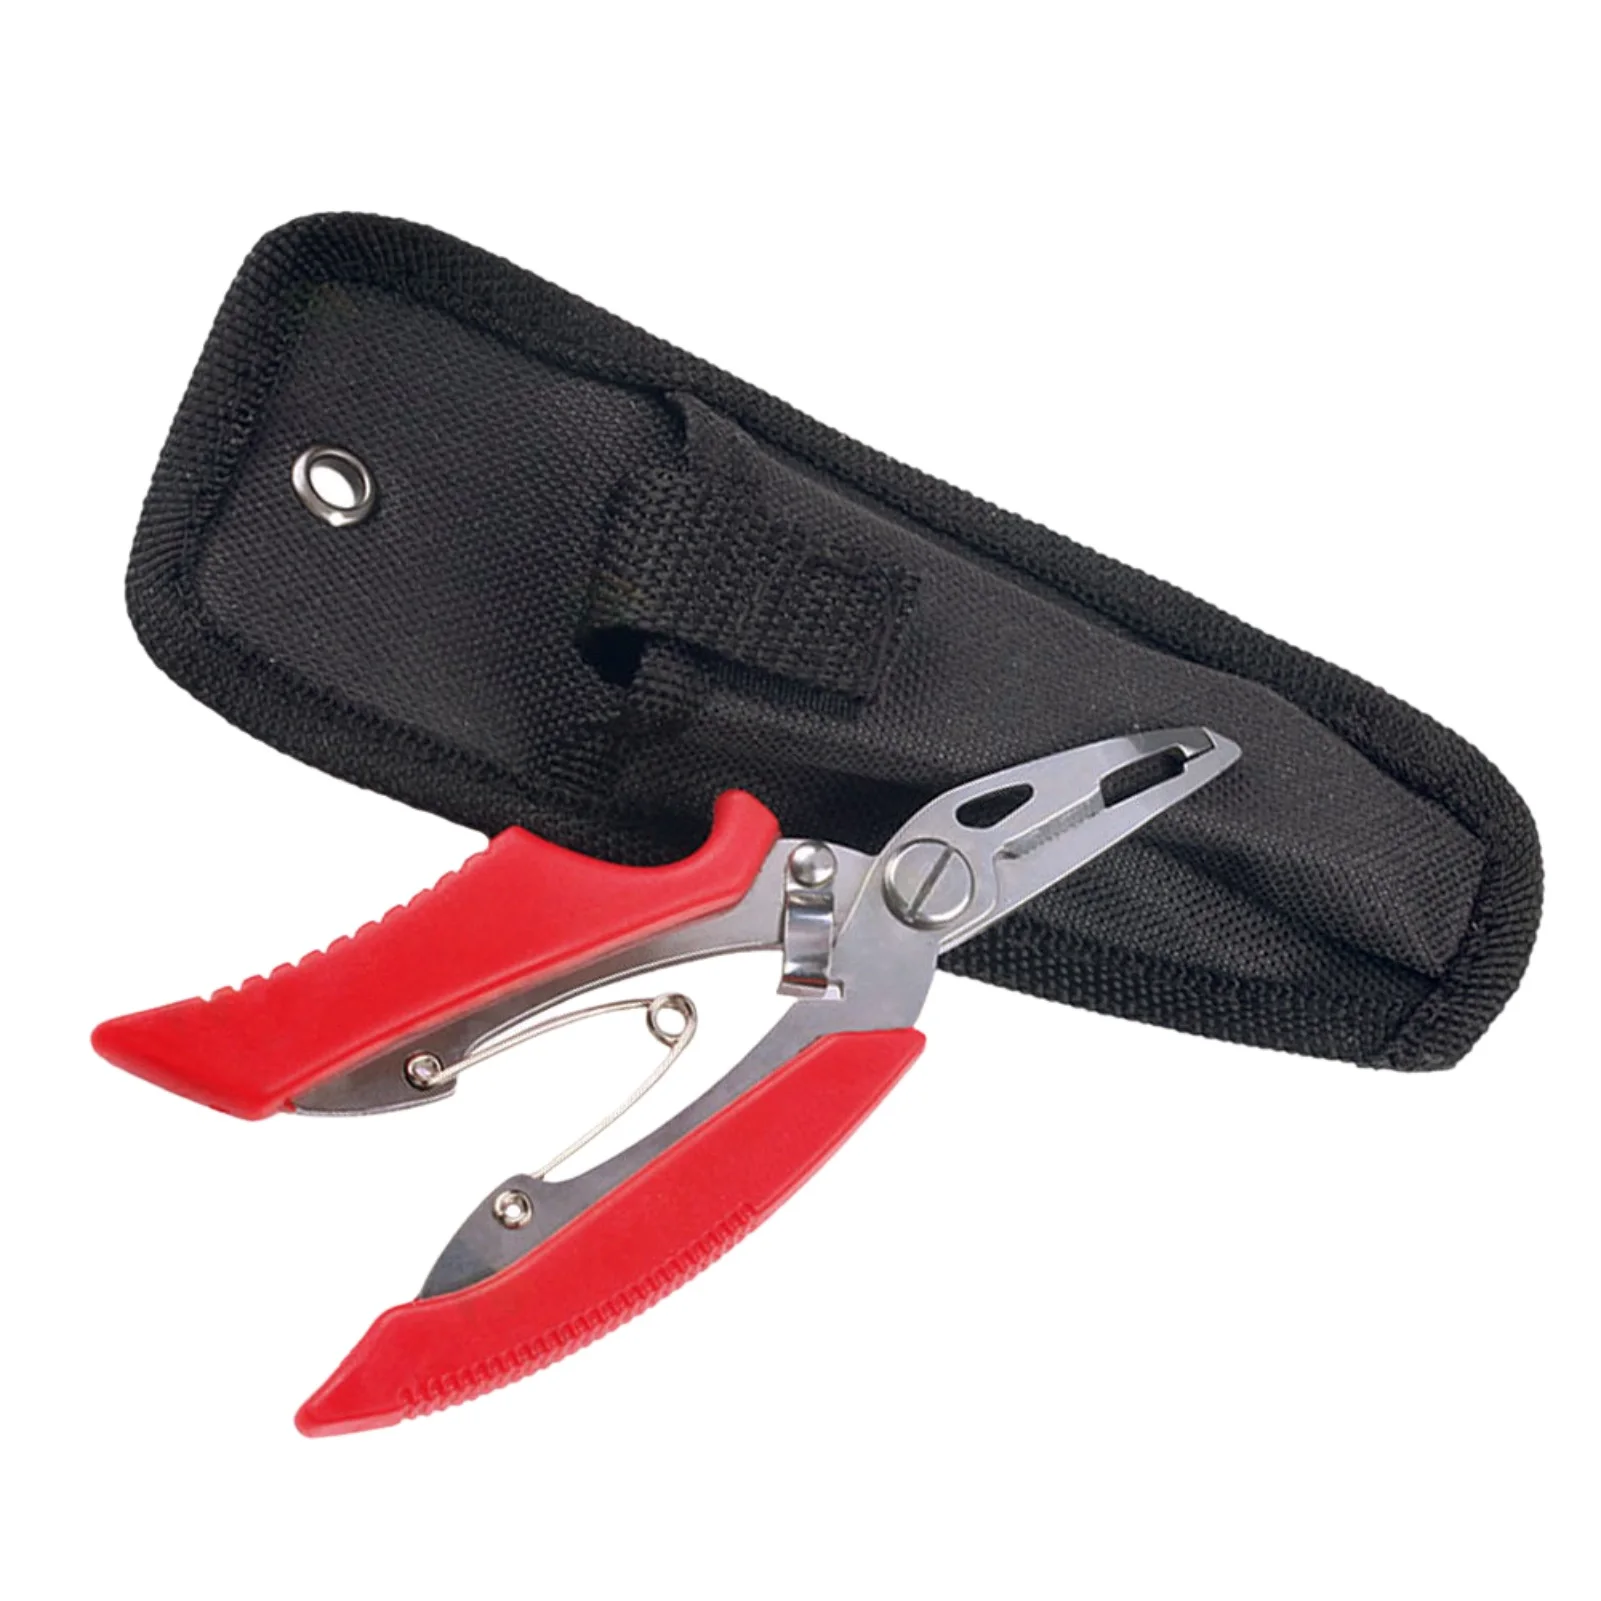 https://ae01.alicdn.com/kf/S7184b62e6b724dd5bfdb24cf1c138dc5Z/Fishing-Pliers-Fishing-Tackle-Pliers-With-Tungsten-Steel-Braid-Cutters-Fish-Line-Remover-Replacement-For-Sea.jpg